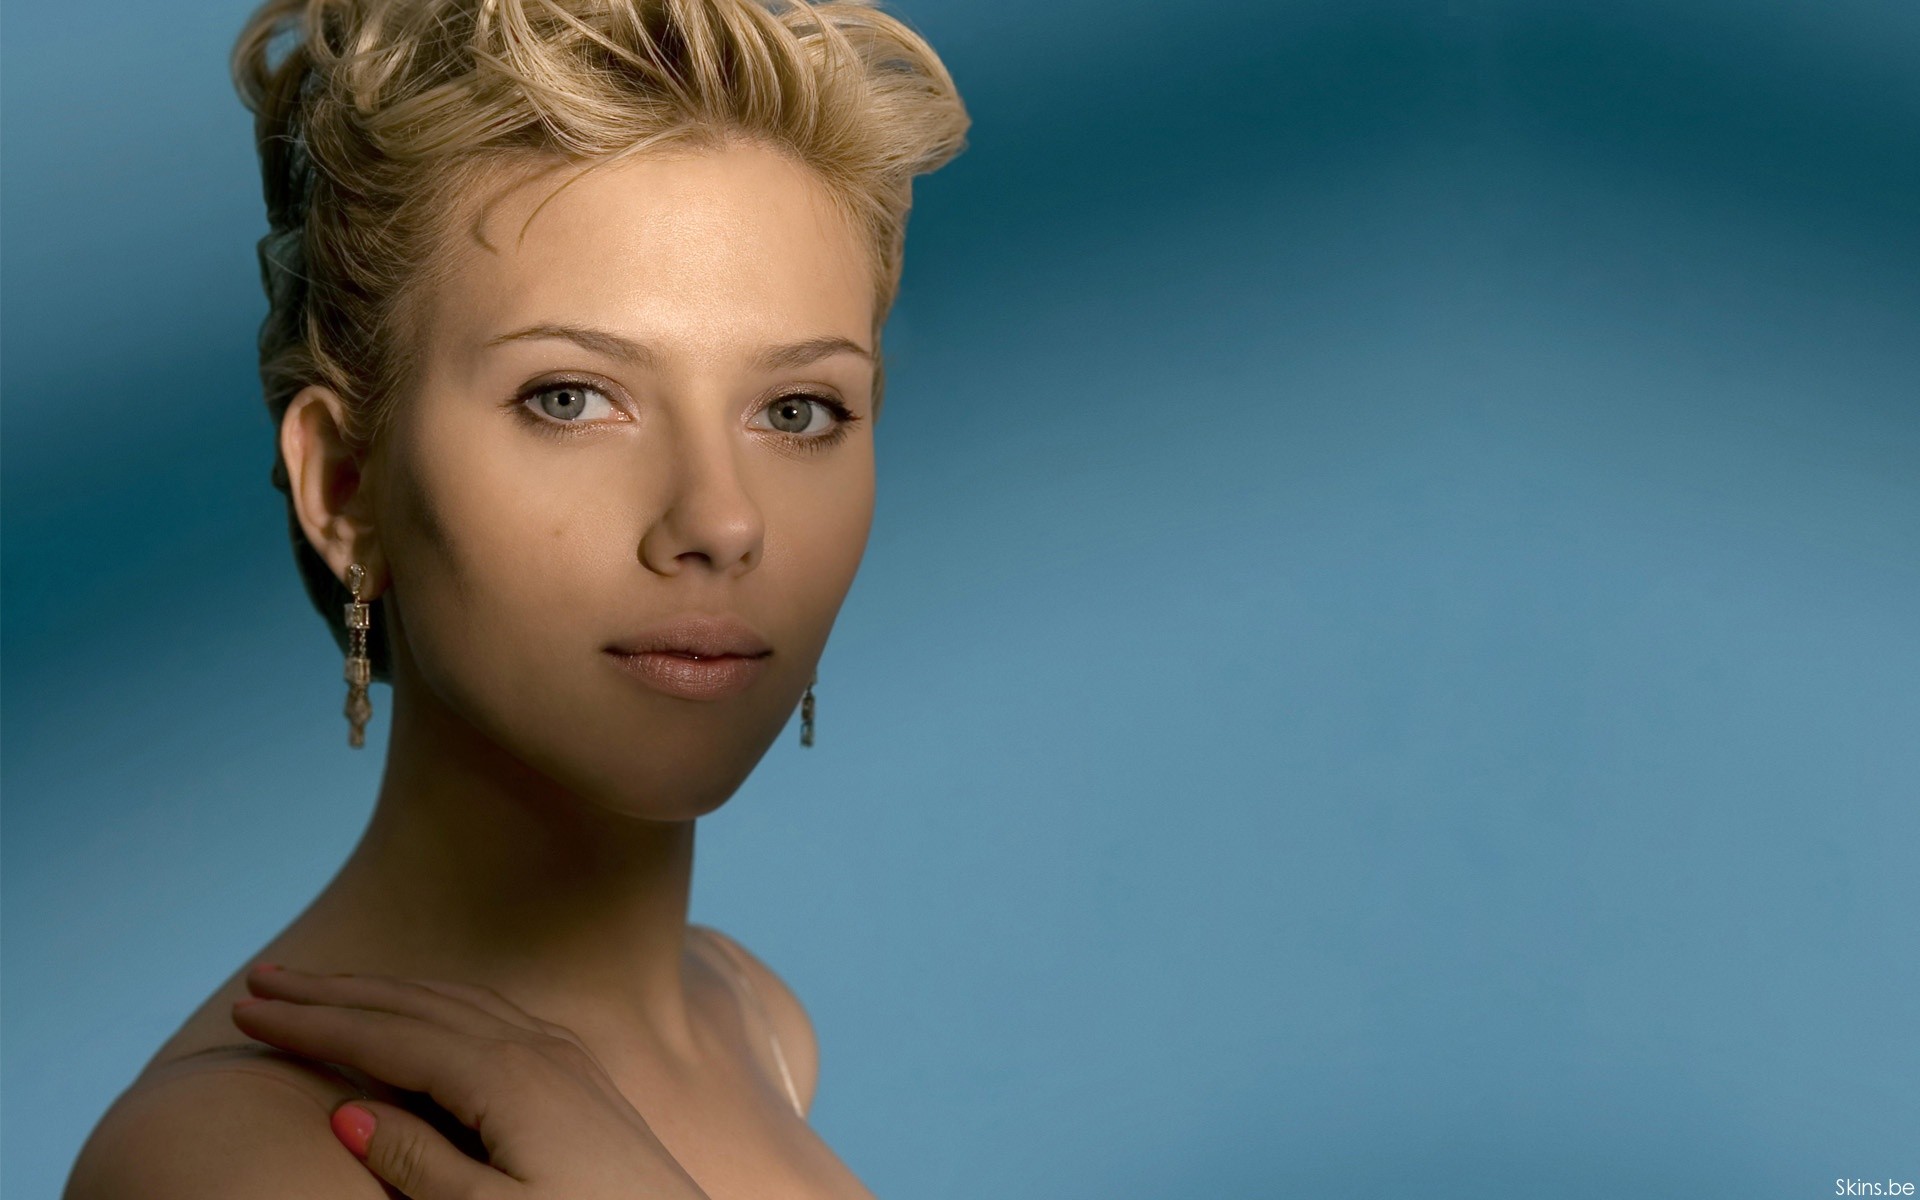 People 1920x1200 celebrity Scarlett Johansson women actress portrait looking at viewer long earrings painted nails blue background face closeup women indoors studio